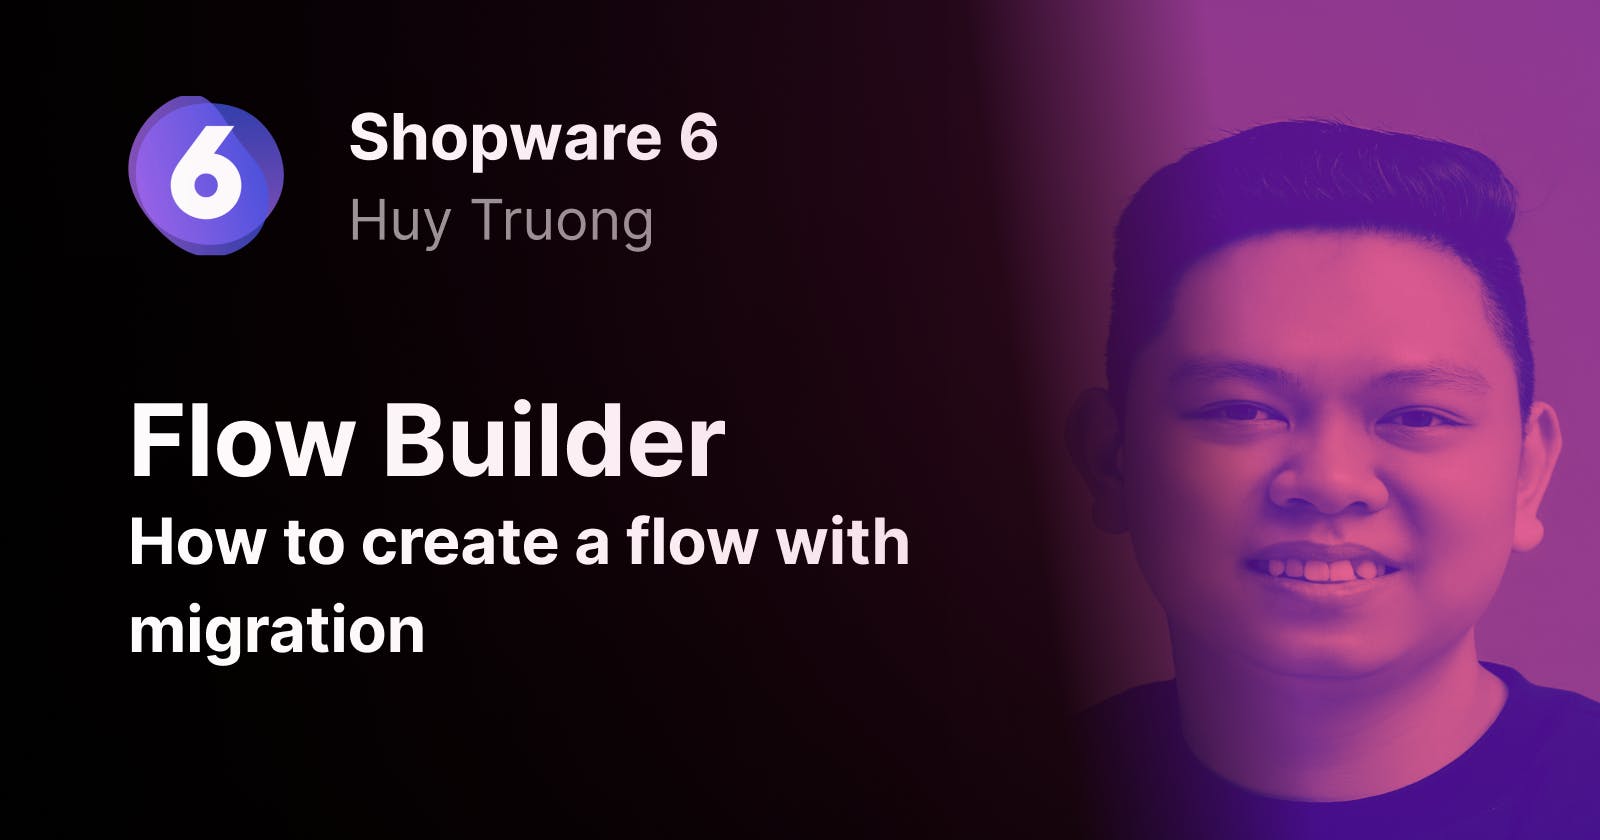 Flow Builder - How to create a flow with migration